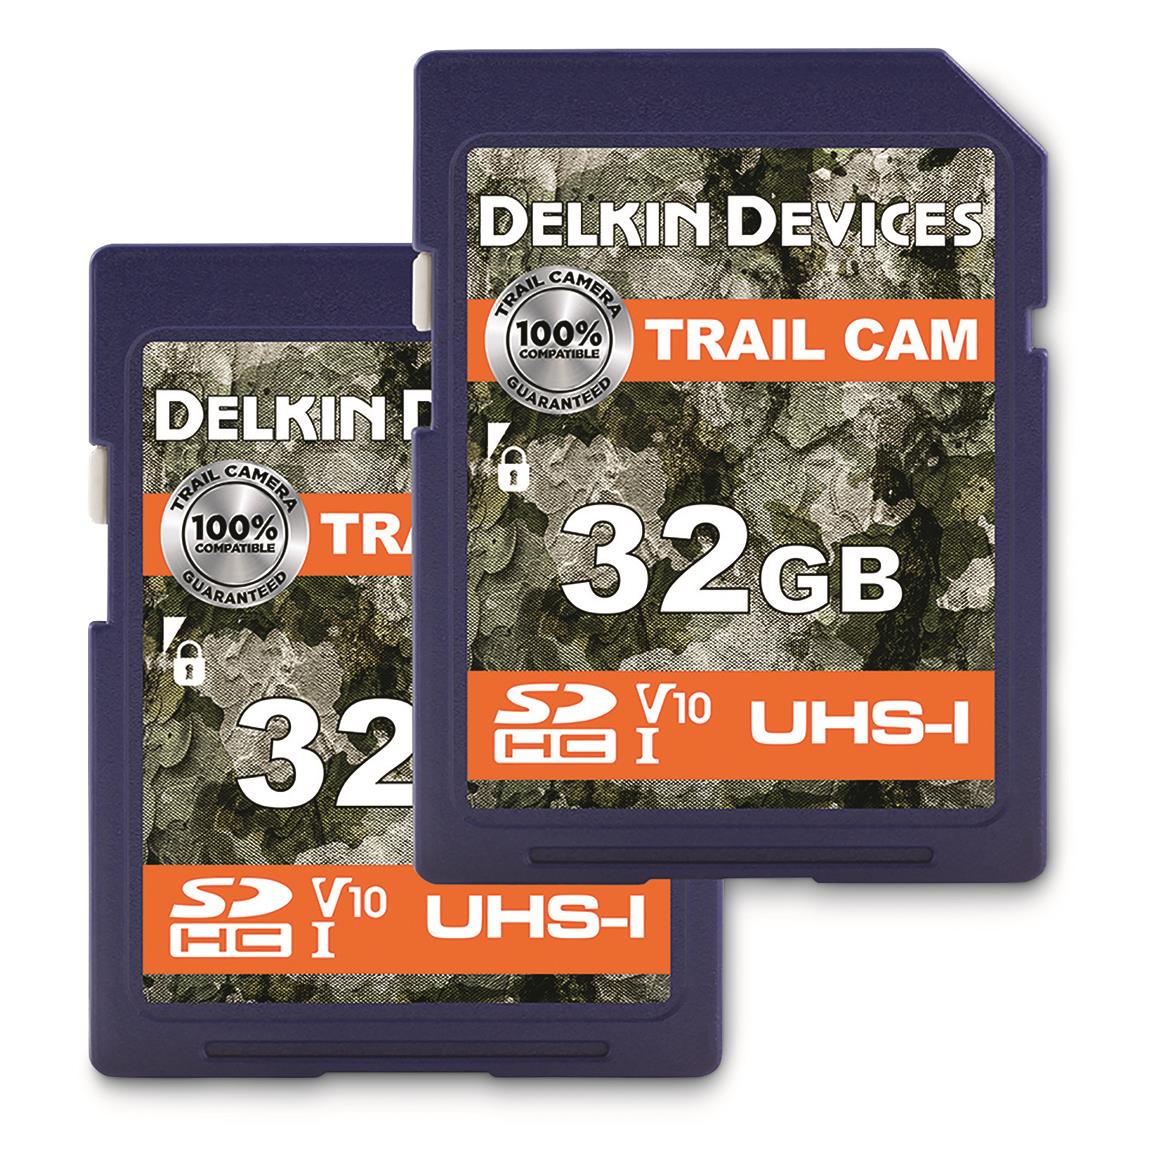 Delkin Devices 32GB SD Memory Card, 2 Pack